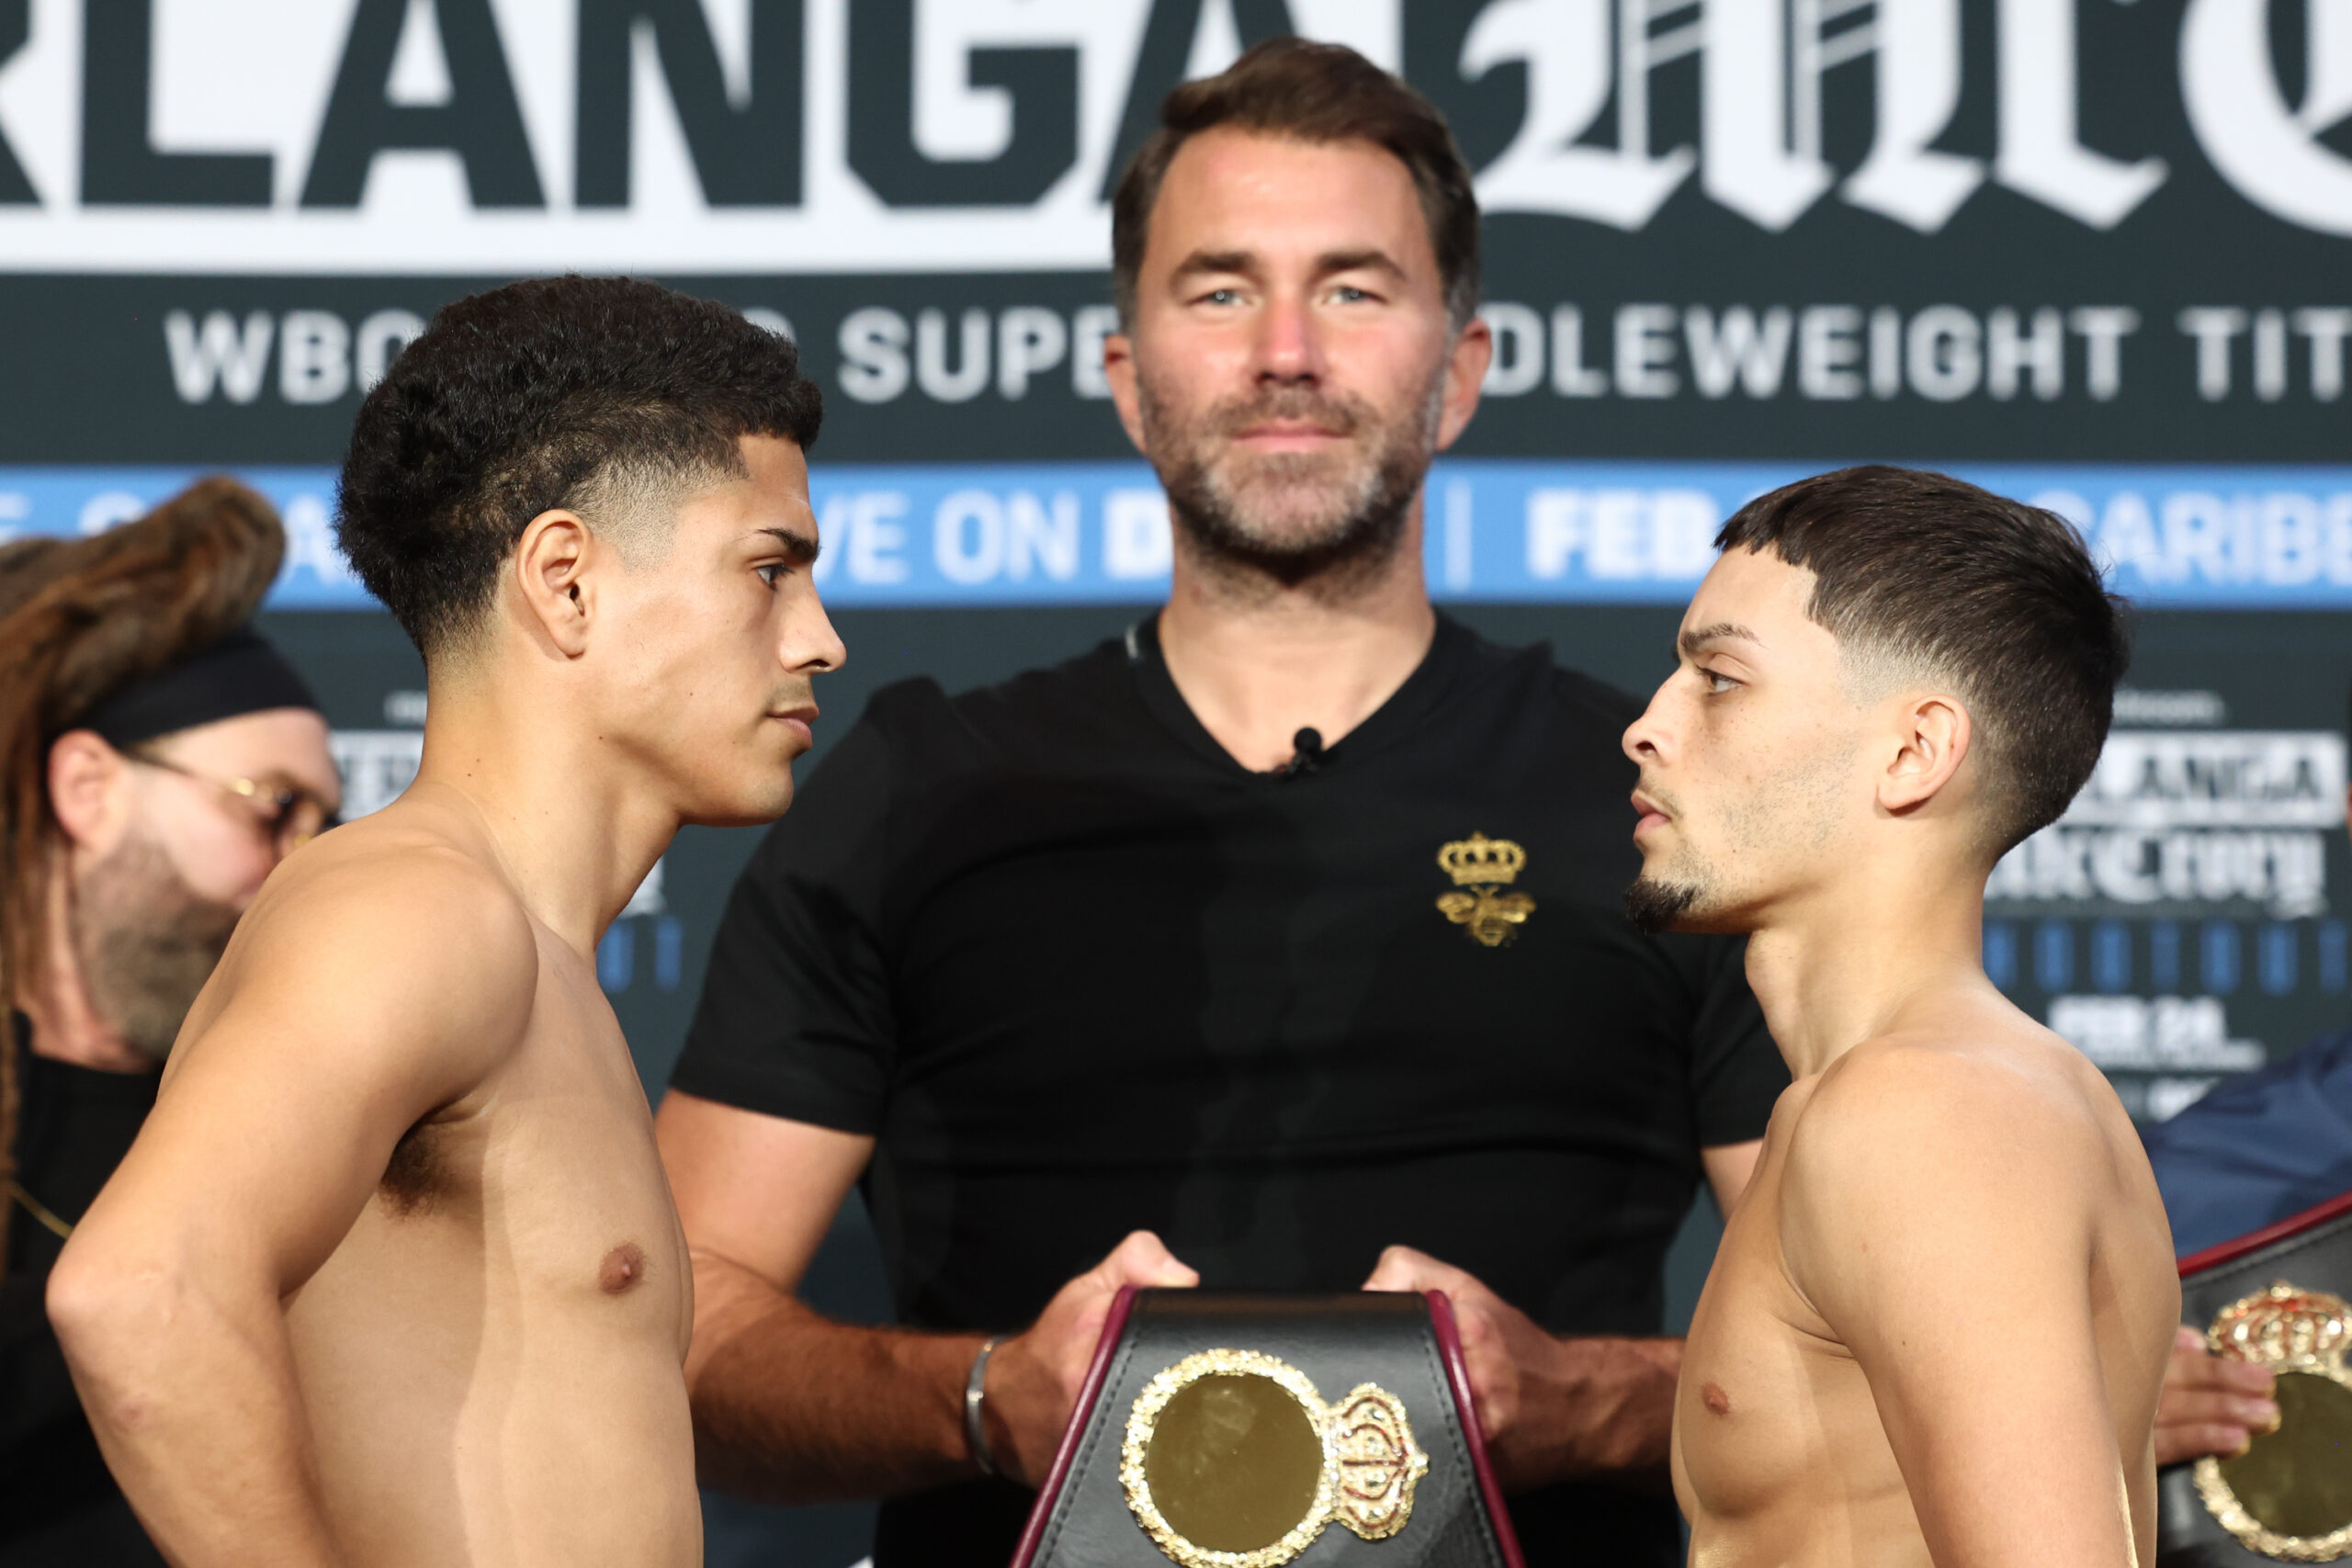 Antonio Vargas and Jonathan Rodríguez pose after weighing in for their February 24, 2024 fight at the Caribe Royale Resort in Orlando, FL. Mandatory Credit: Ed Mulholland/Matchroom.